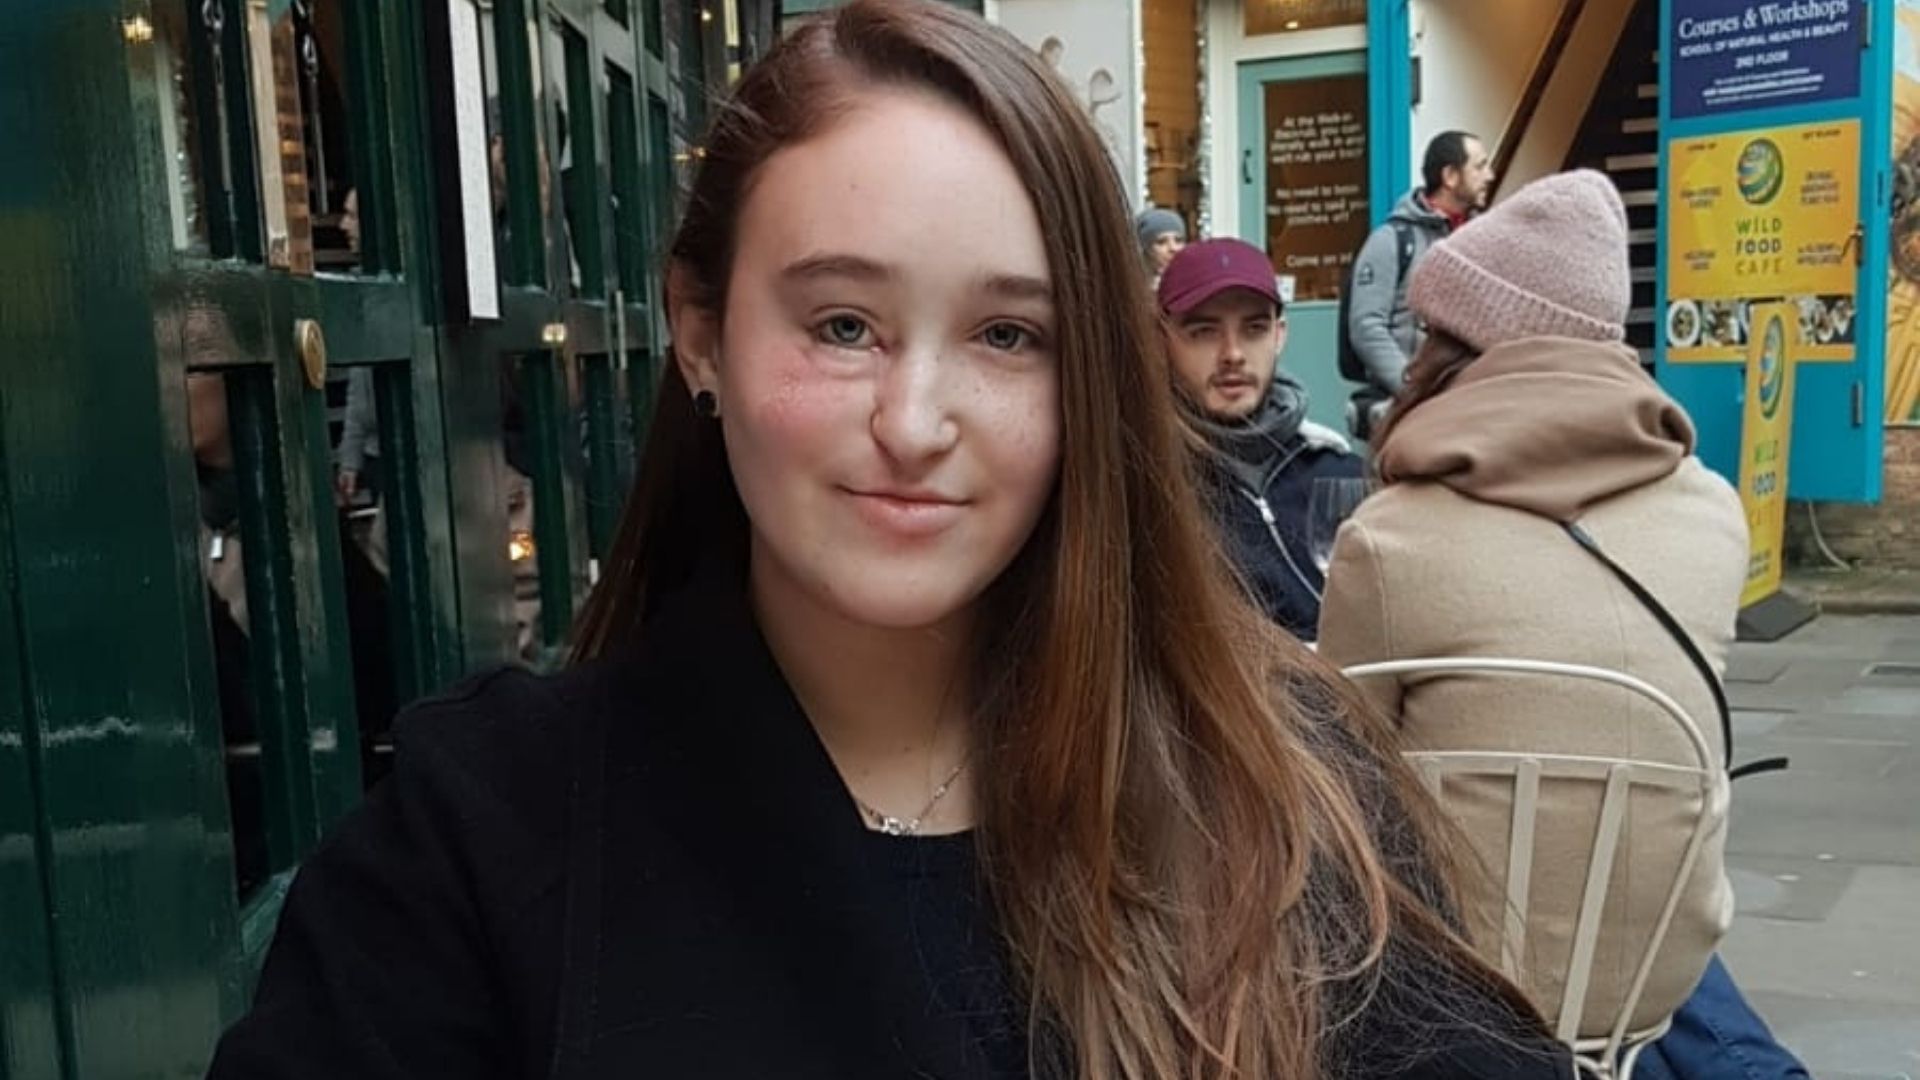 Abigail, a 16-year-old white woman who has long brown hair and facial scarring. She's wearing a black jacket and jumper and sitting outdoors at a cafe table on a street.